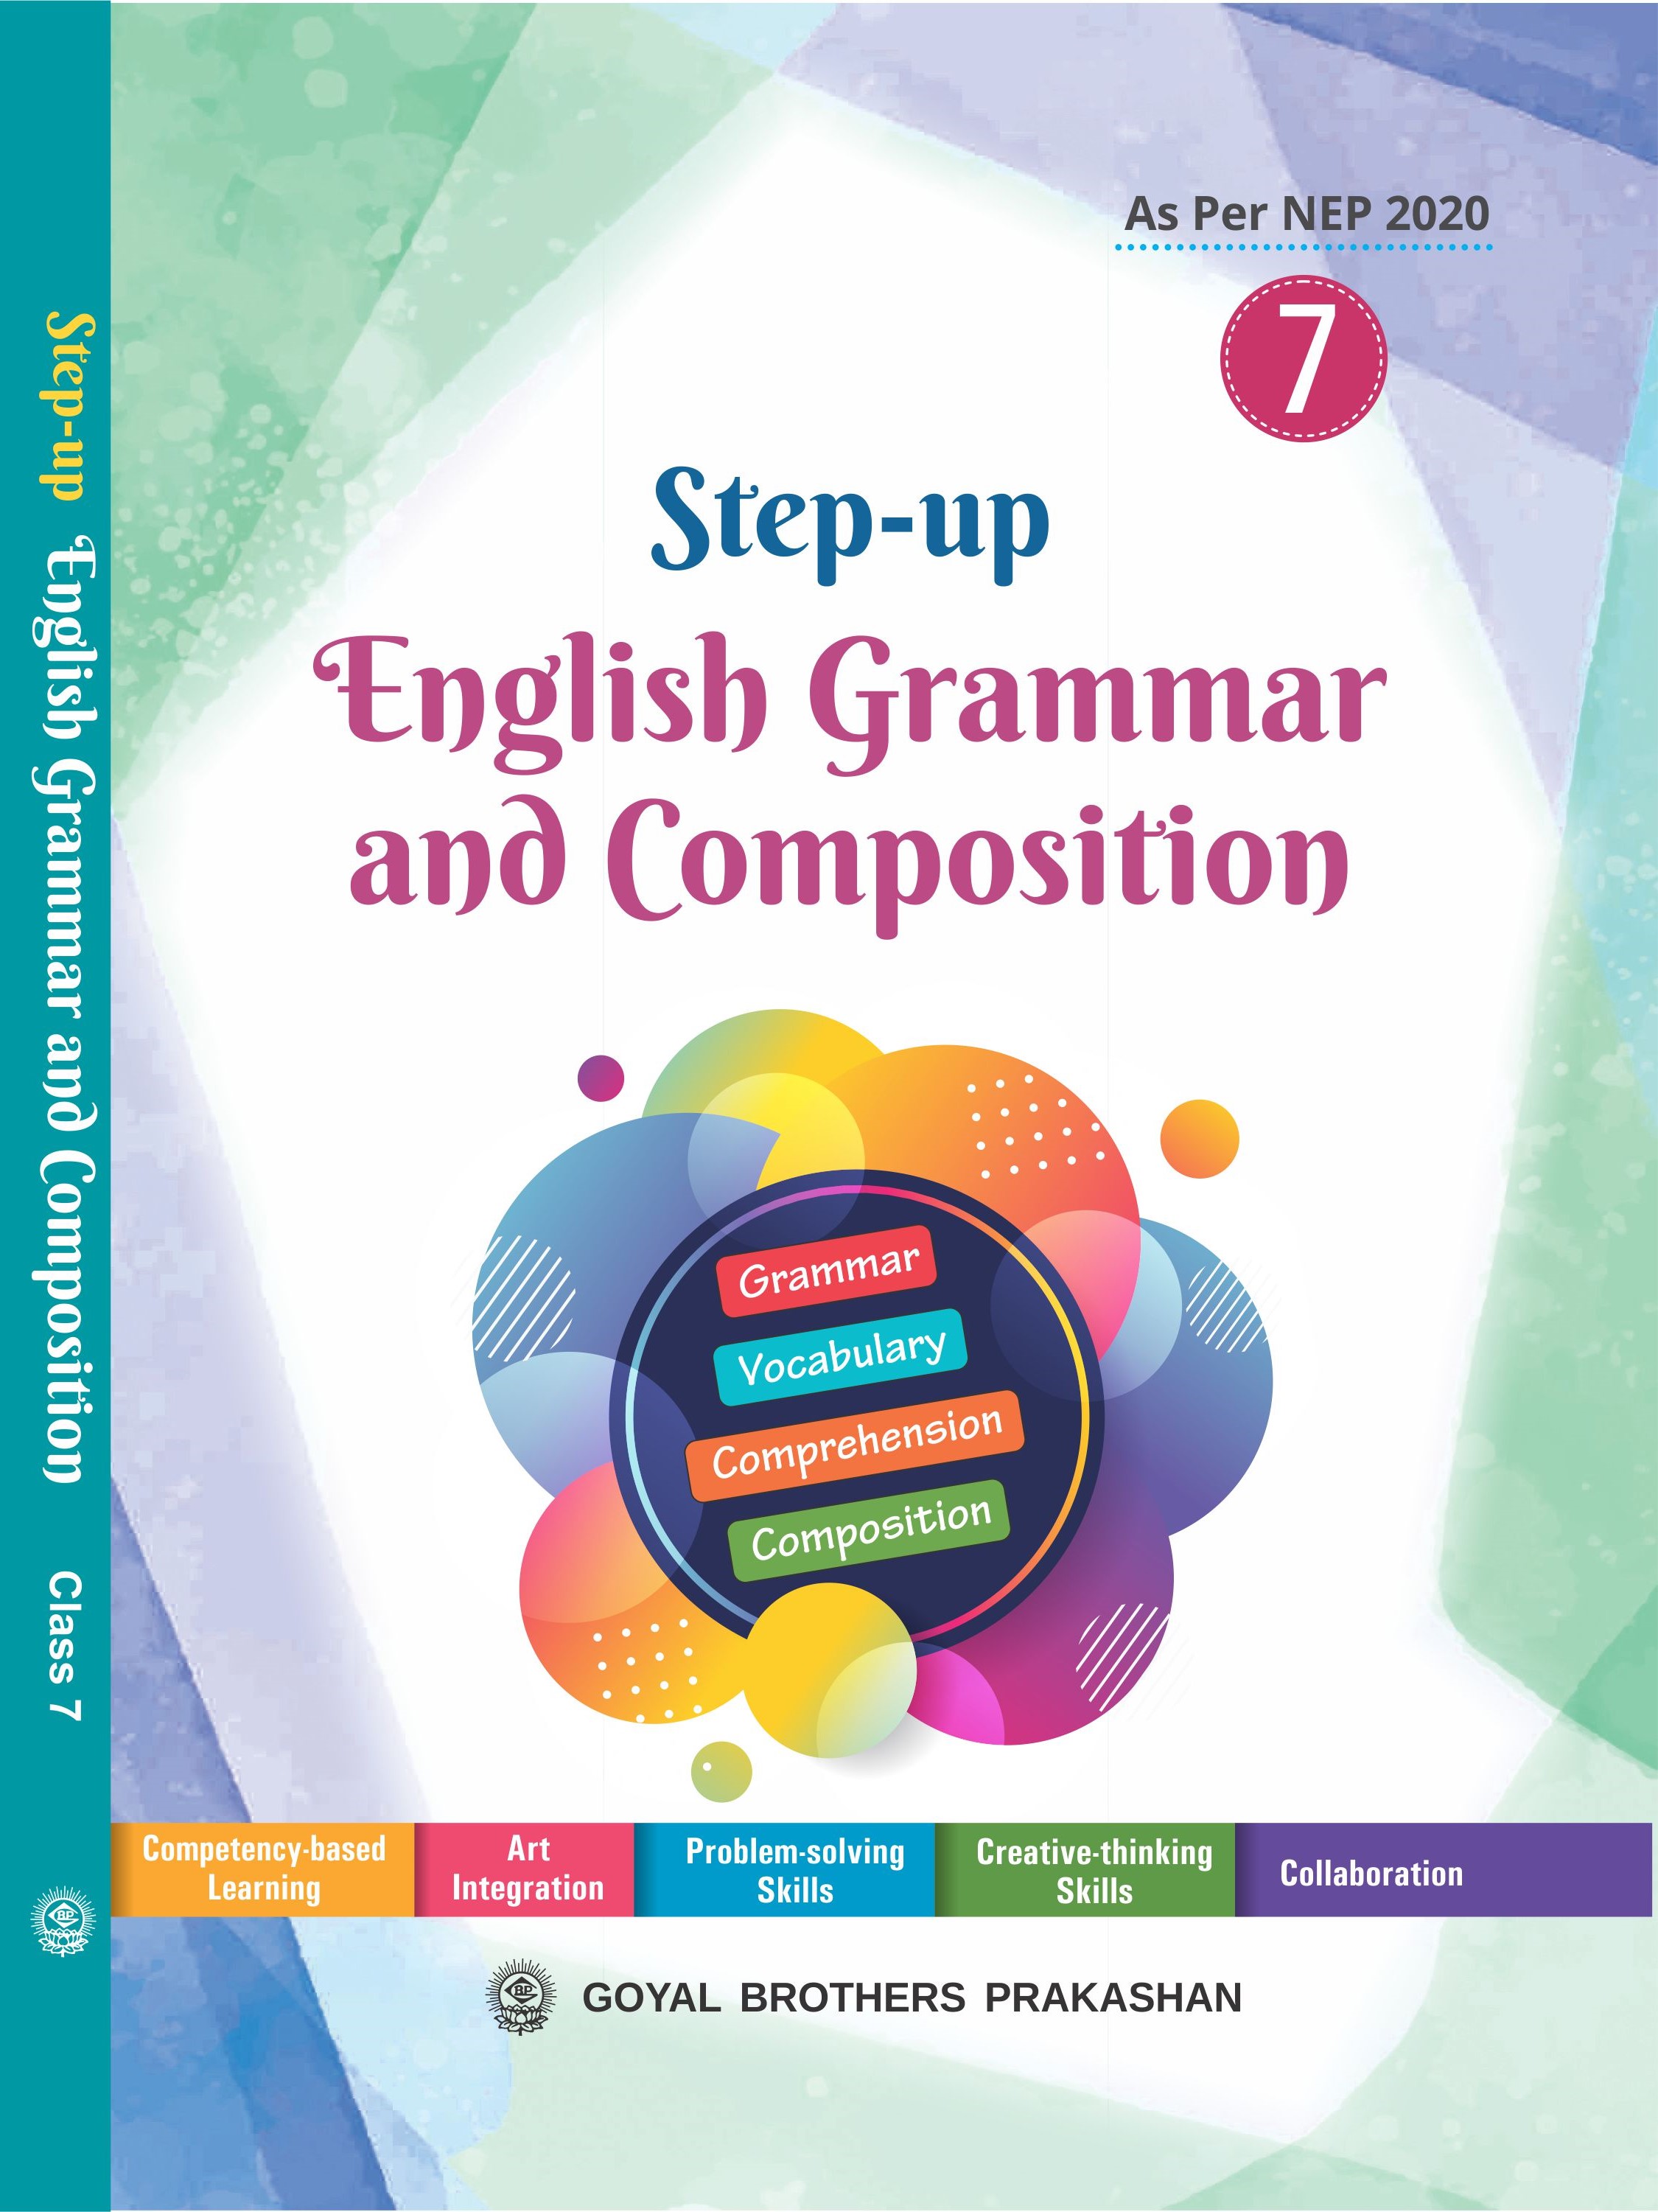 Step up English Grammar and Composition for 7